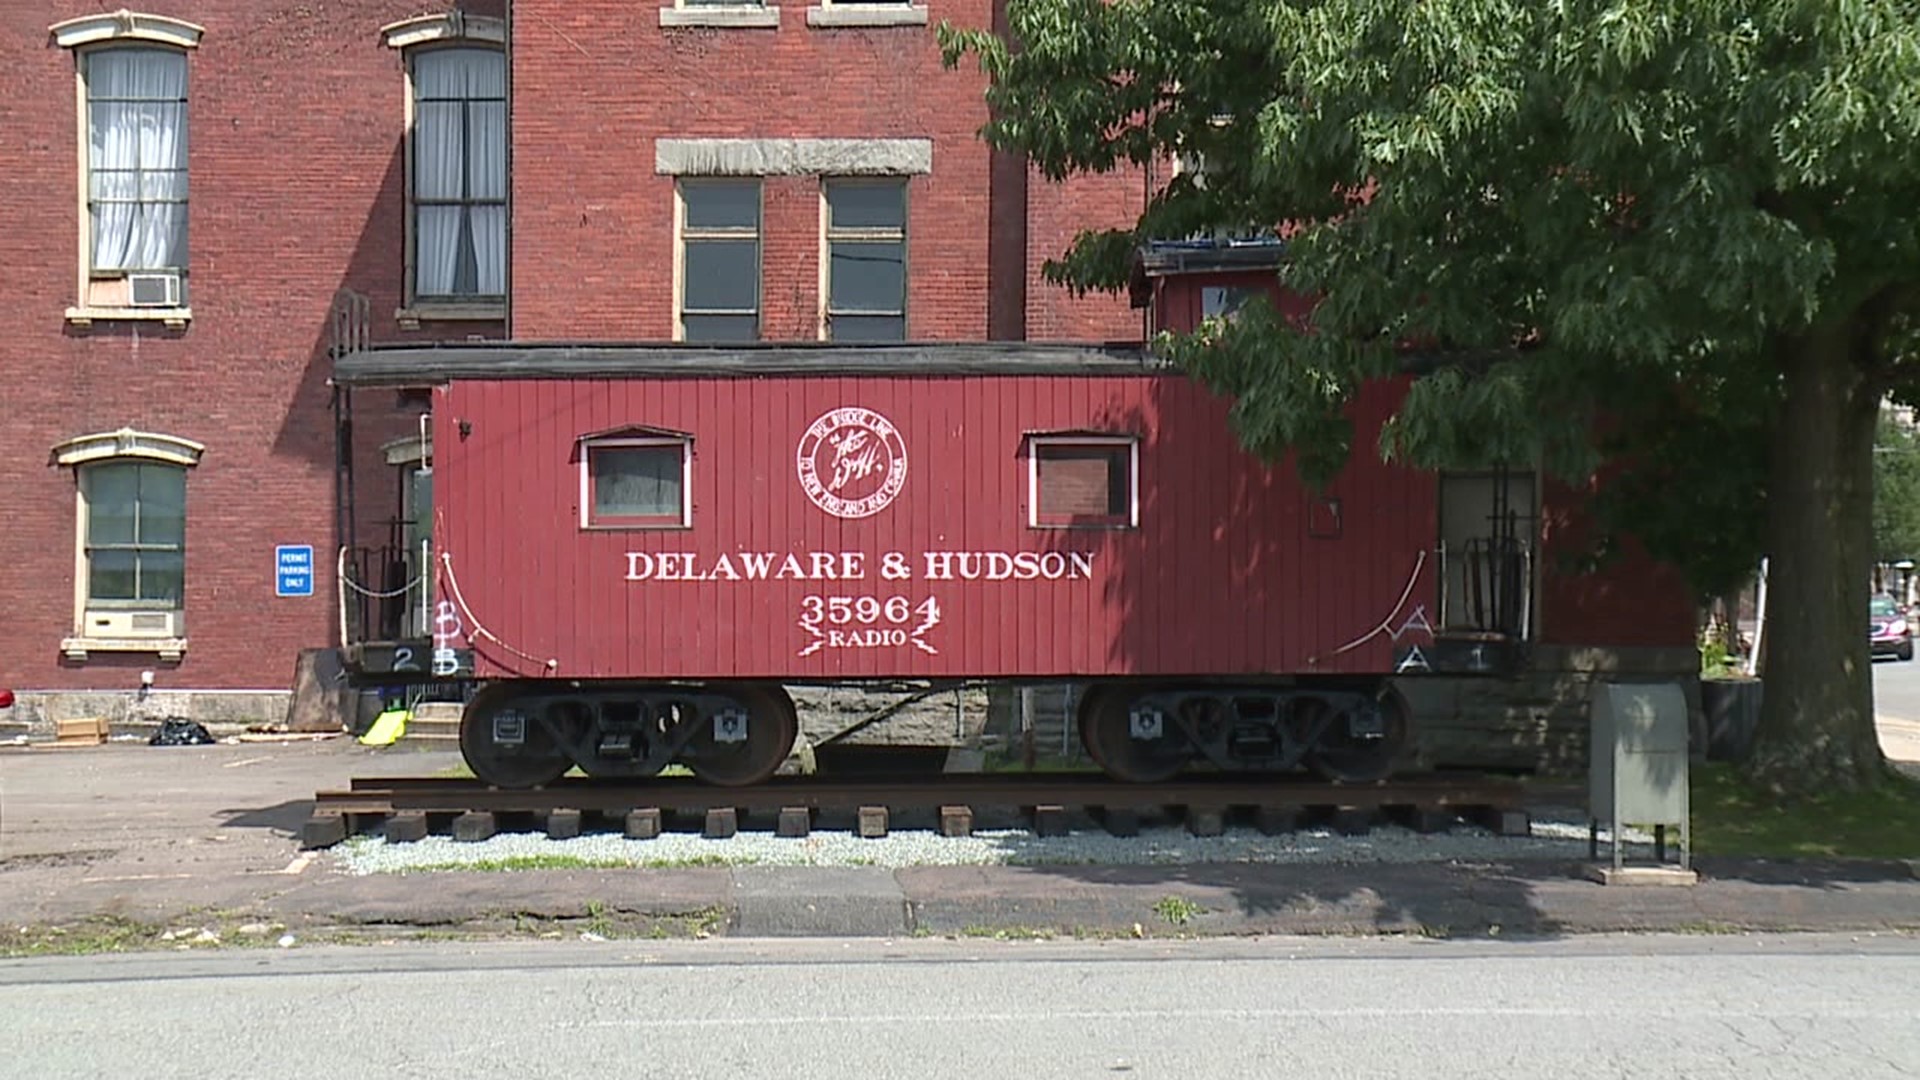 The Carbondale Historical Society cleaned and placed the caboose on replica tracks close to Main Street.